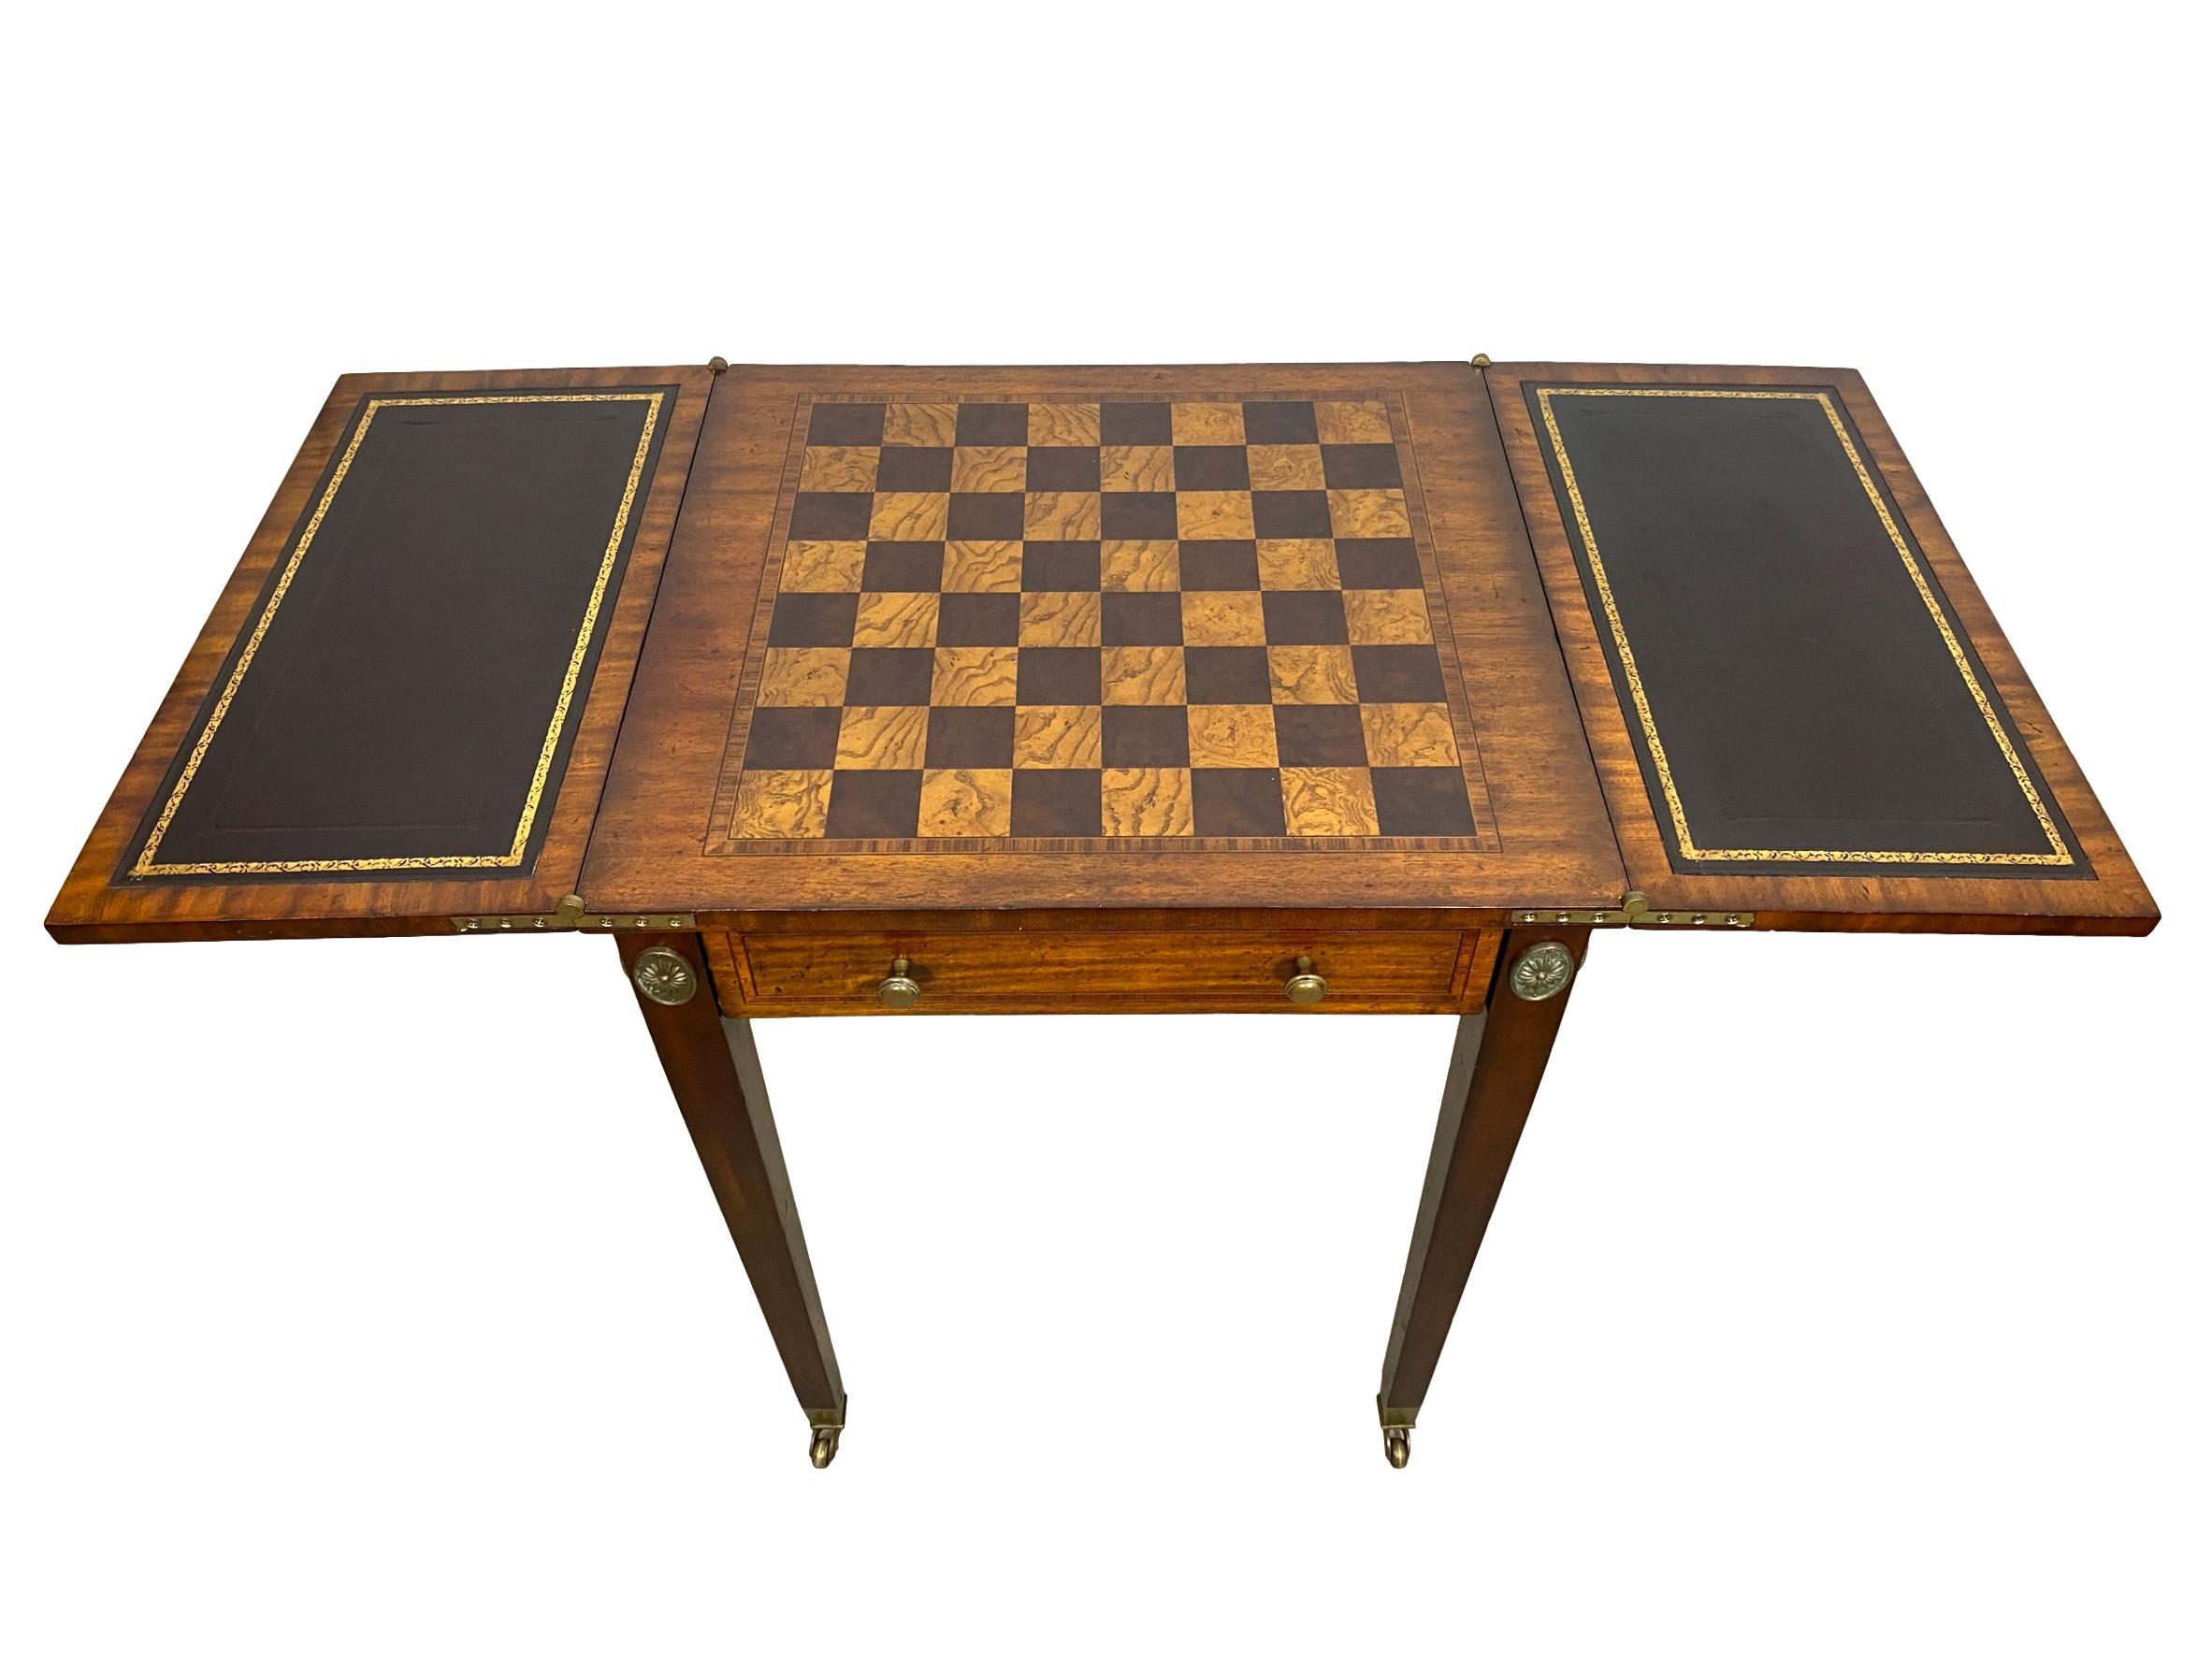 Maitland-Smith. Inlaid with exotic woods and marquetry Convertable chess game table board with brass mounts. With maker's brass plaque: 'Maitland-Smith'. Comes with original and complete chess and checker set.